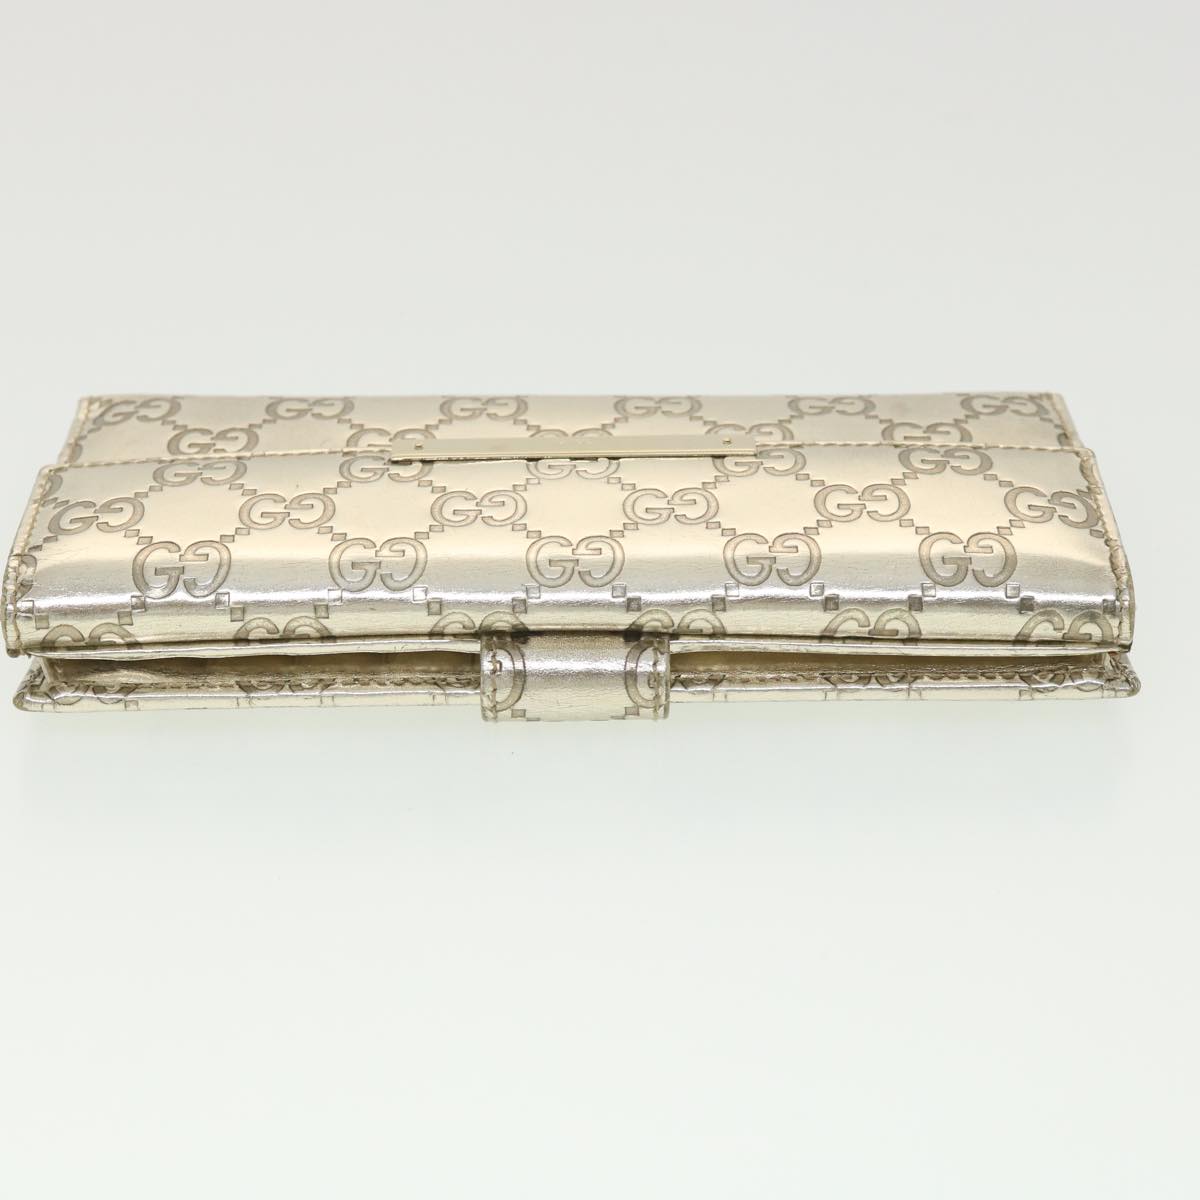 GUCCI GG Canvas Guccissima Long Wallet Silver 112715 Auth 37982